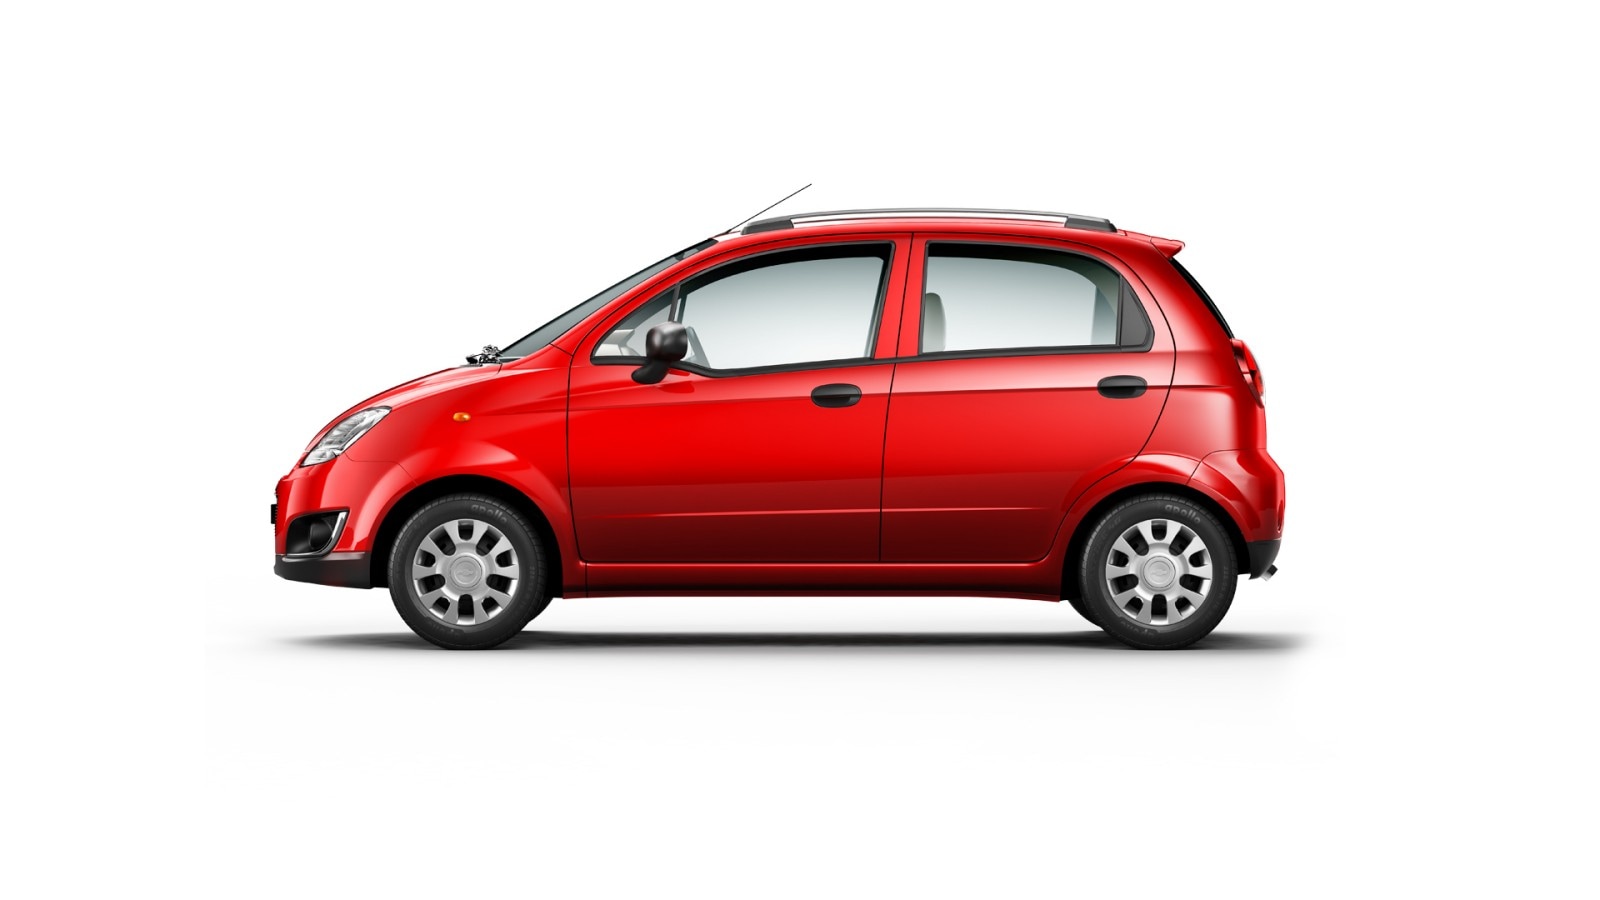 Chevrolet Spark India, Price, Review, Images Chevrolet Cars